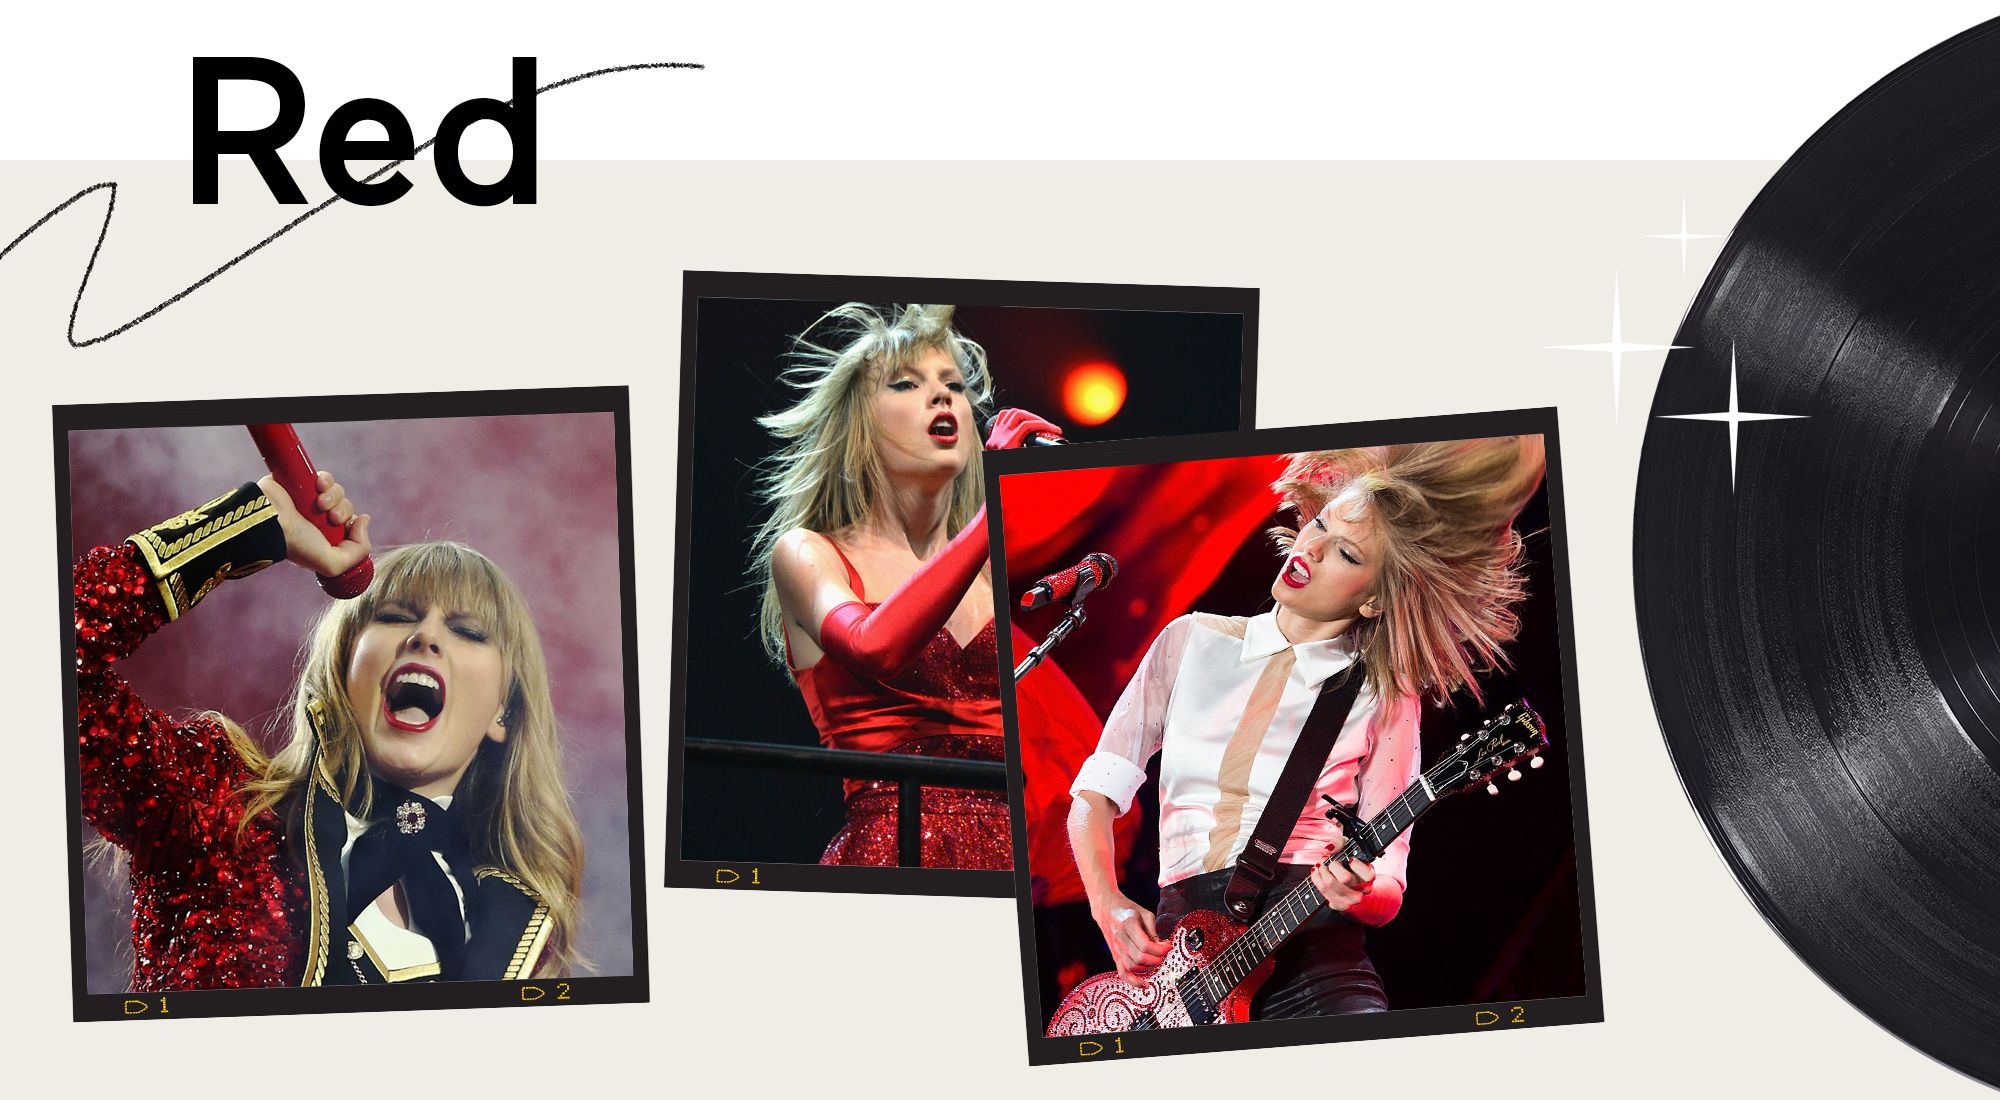 All of Taylor Swift's Albums From Least to Most Iconic